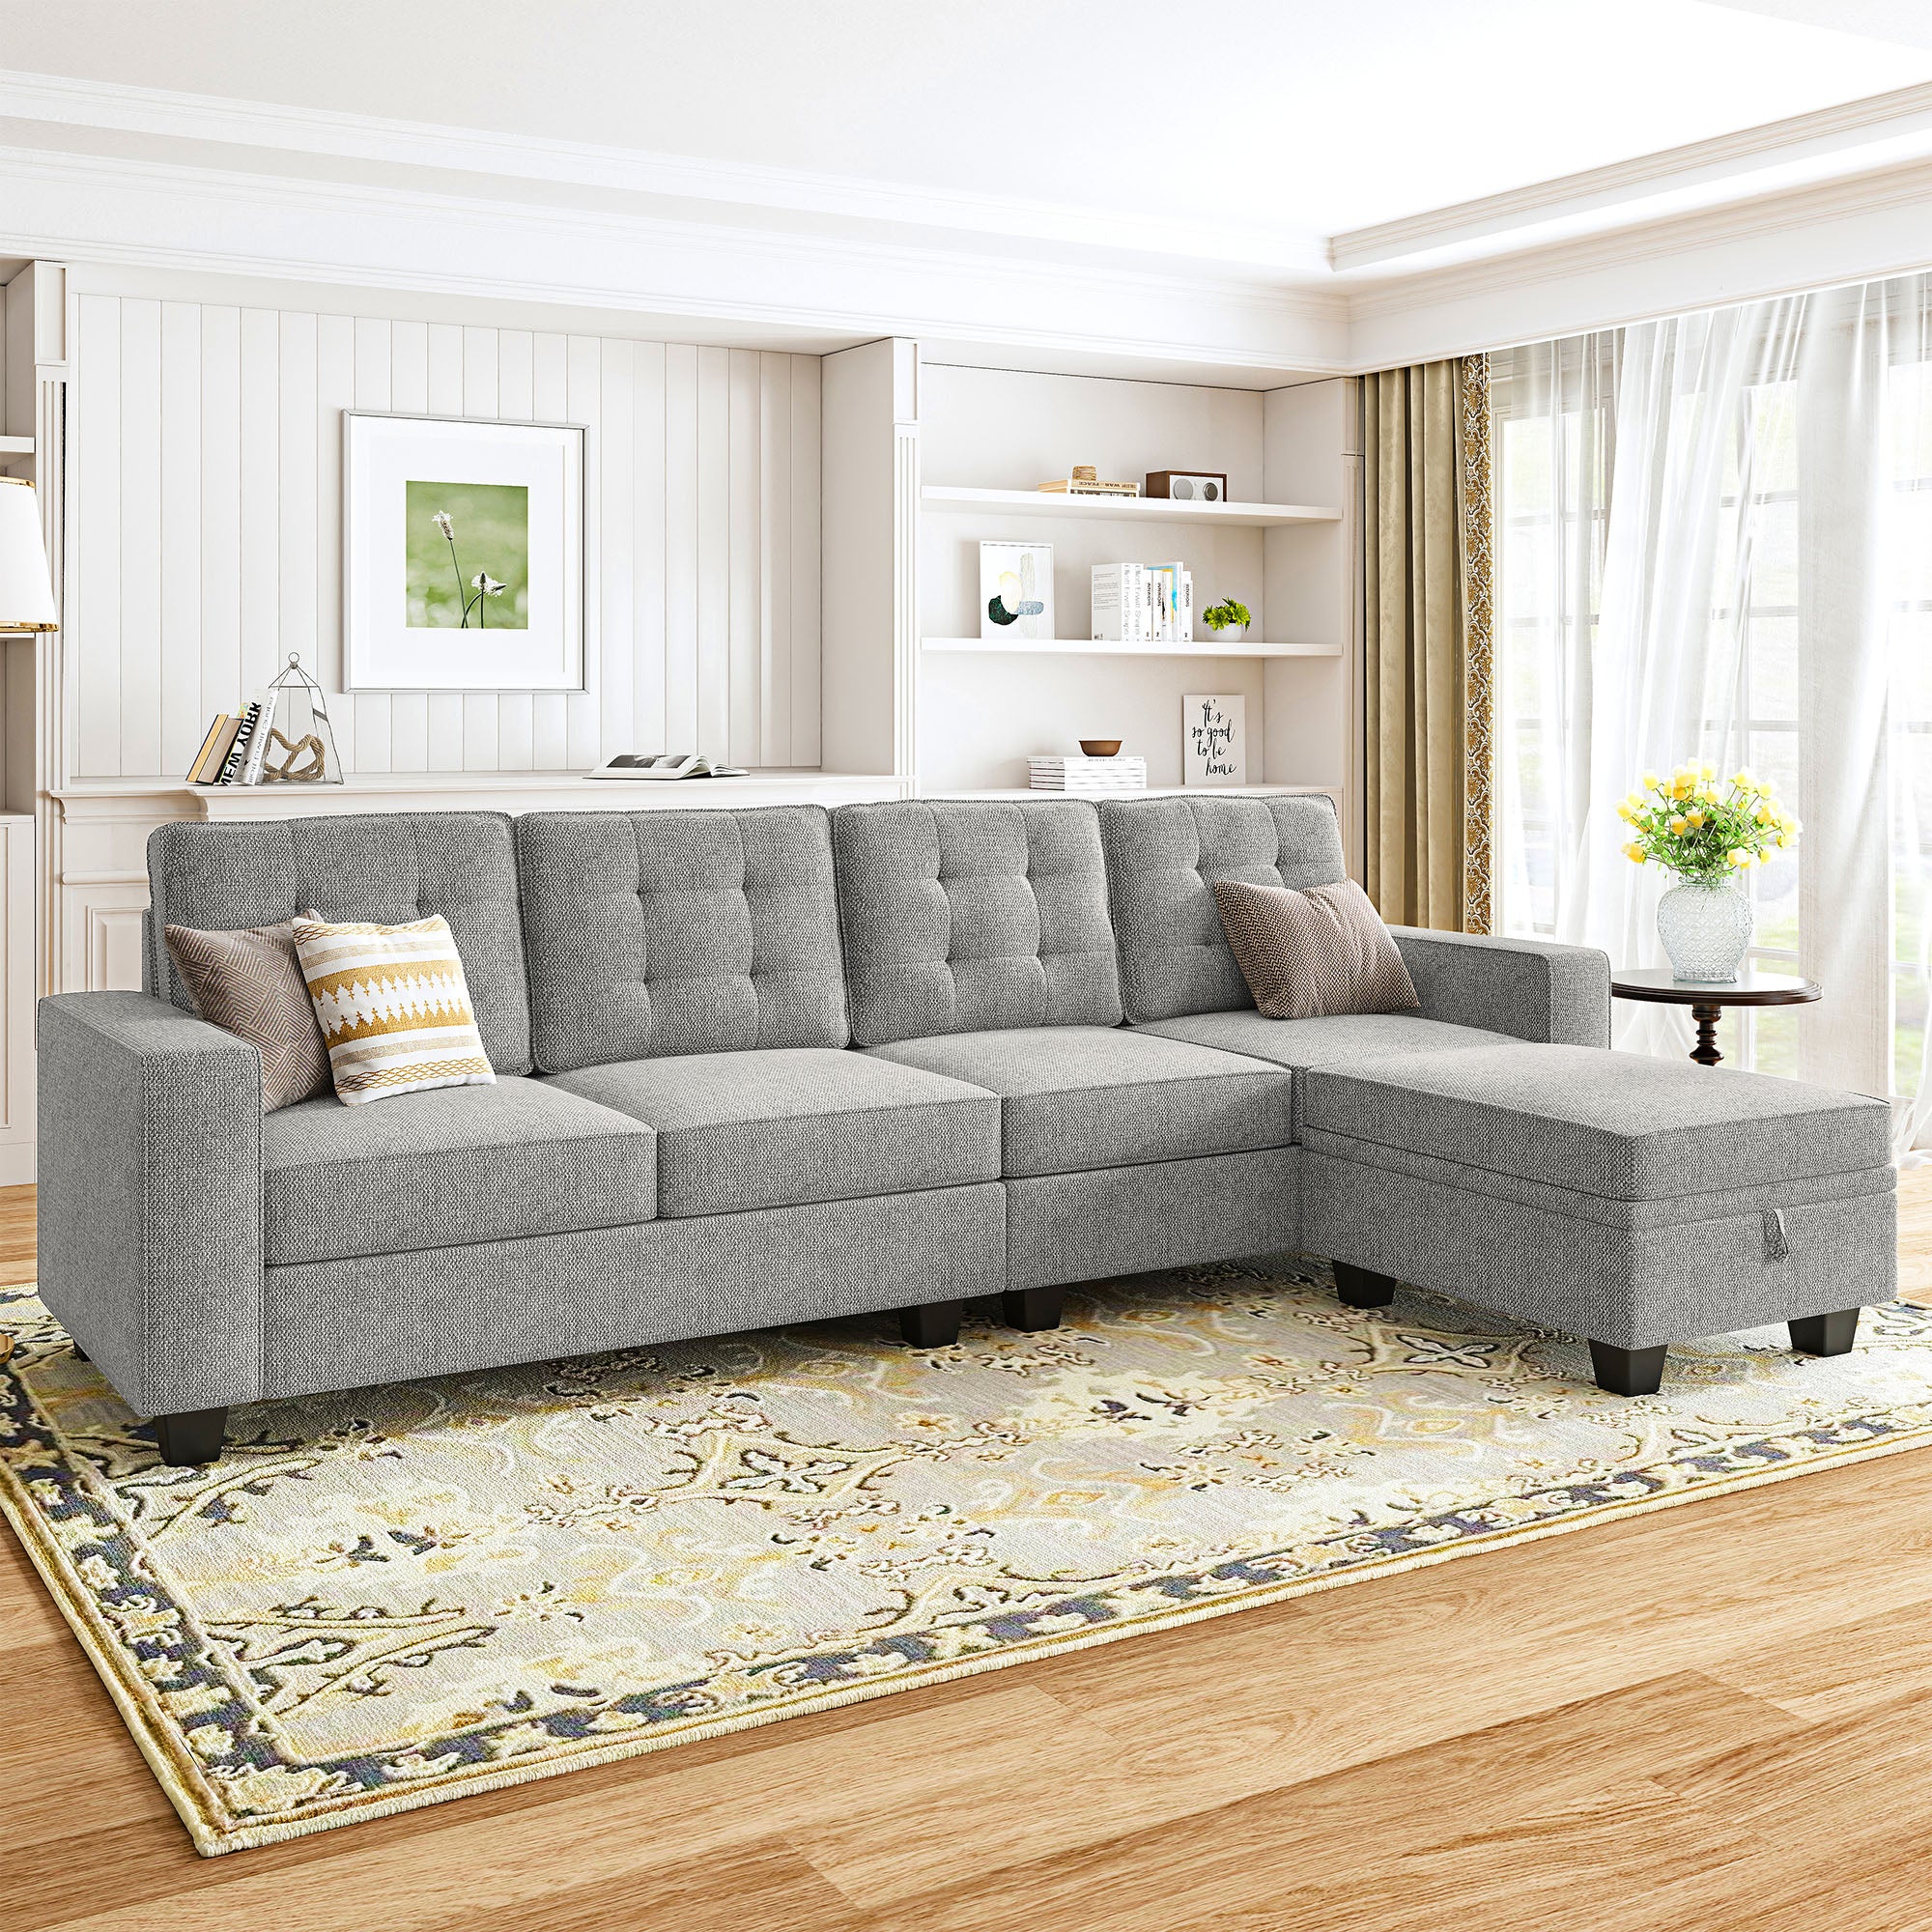 HONBAY Grey L-Shaped Sectional Sofa Couch for Living Room